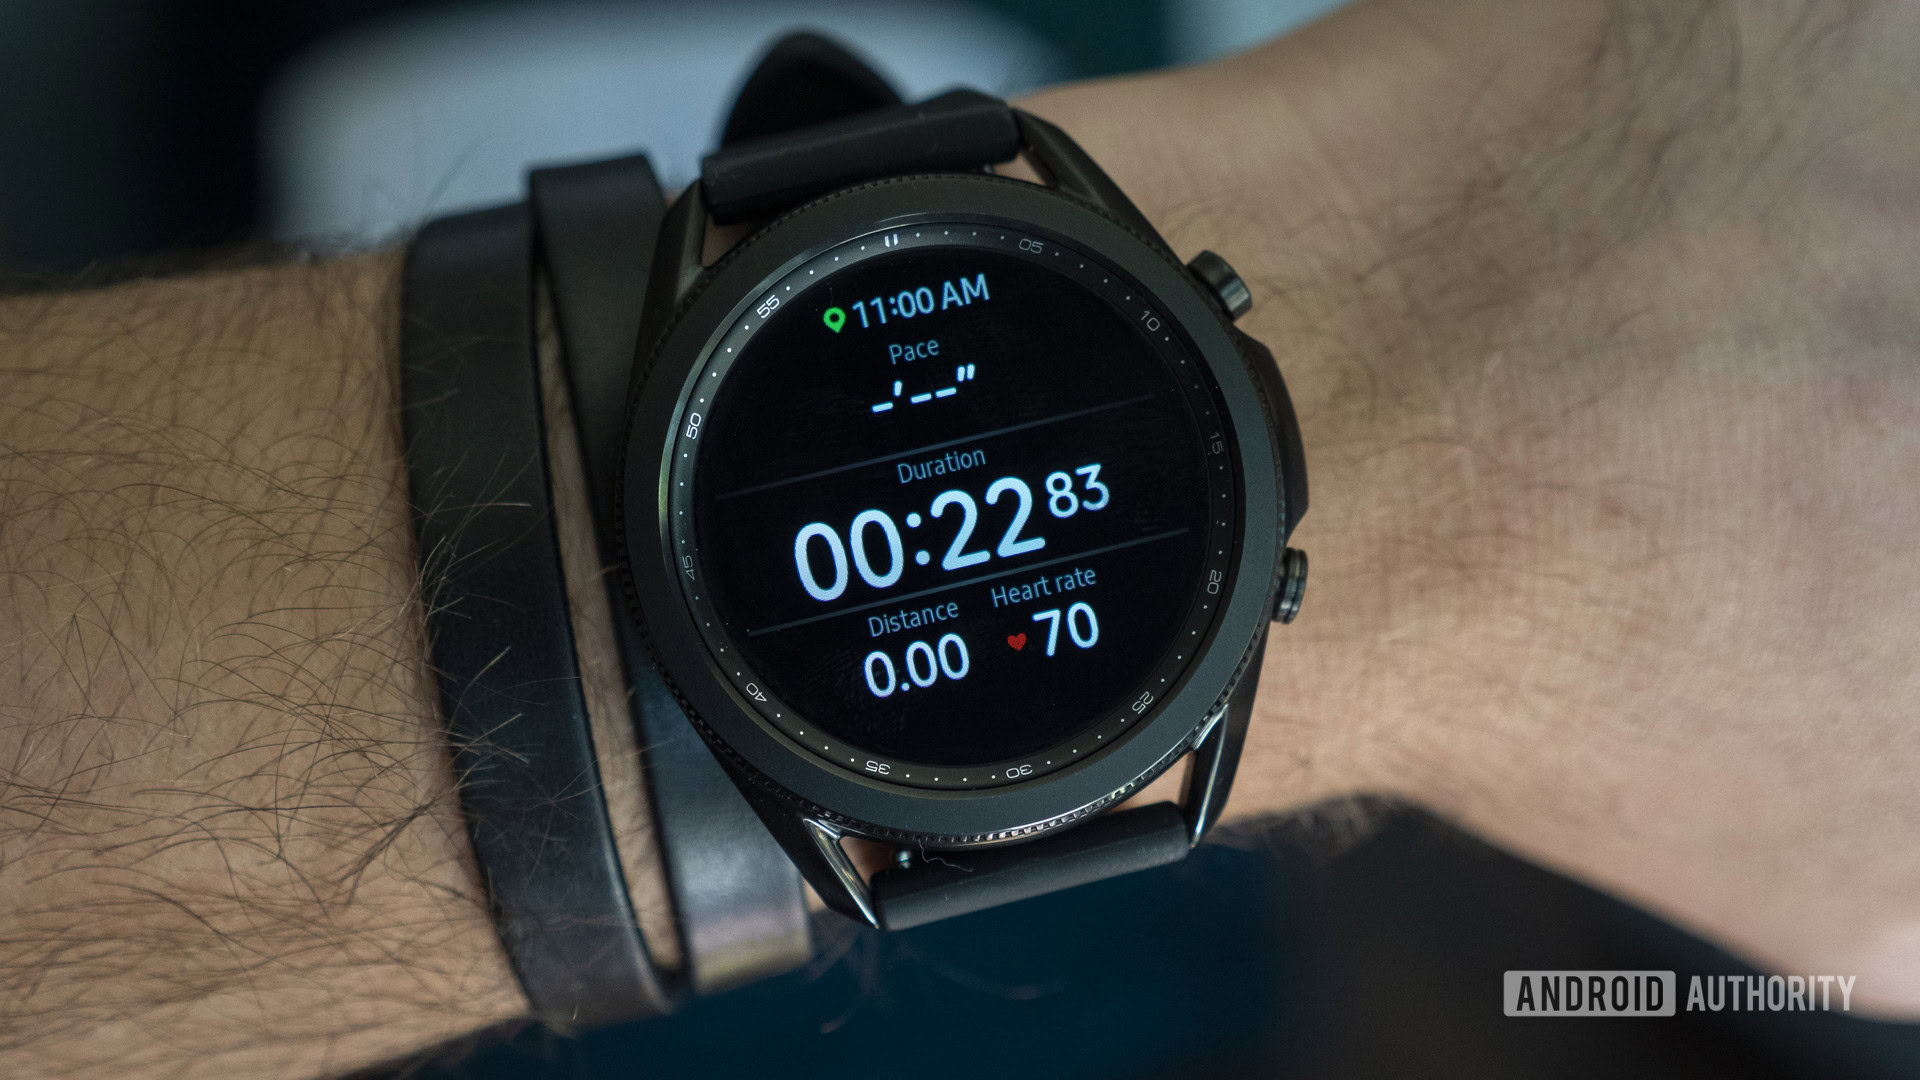 The Most Common Samsung Galaxy Watch Problems And How To Fix Them